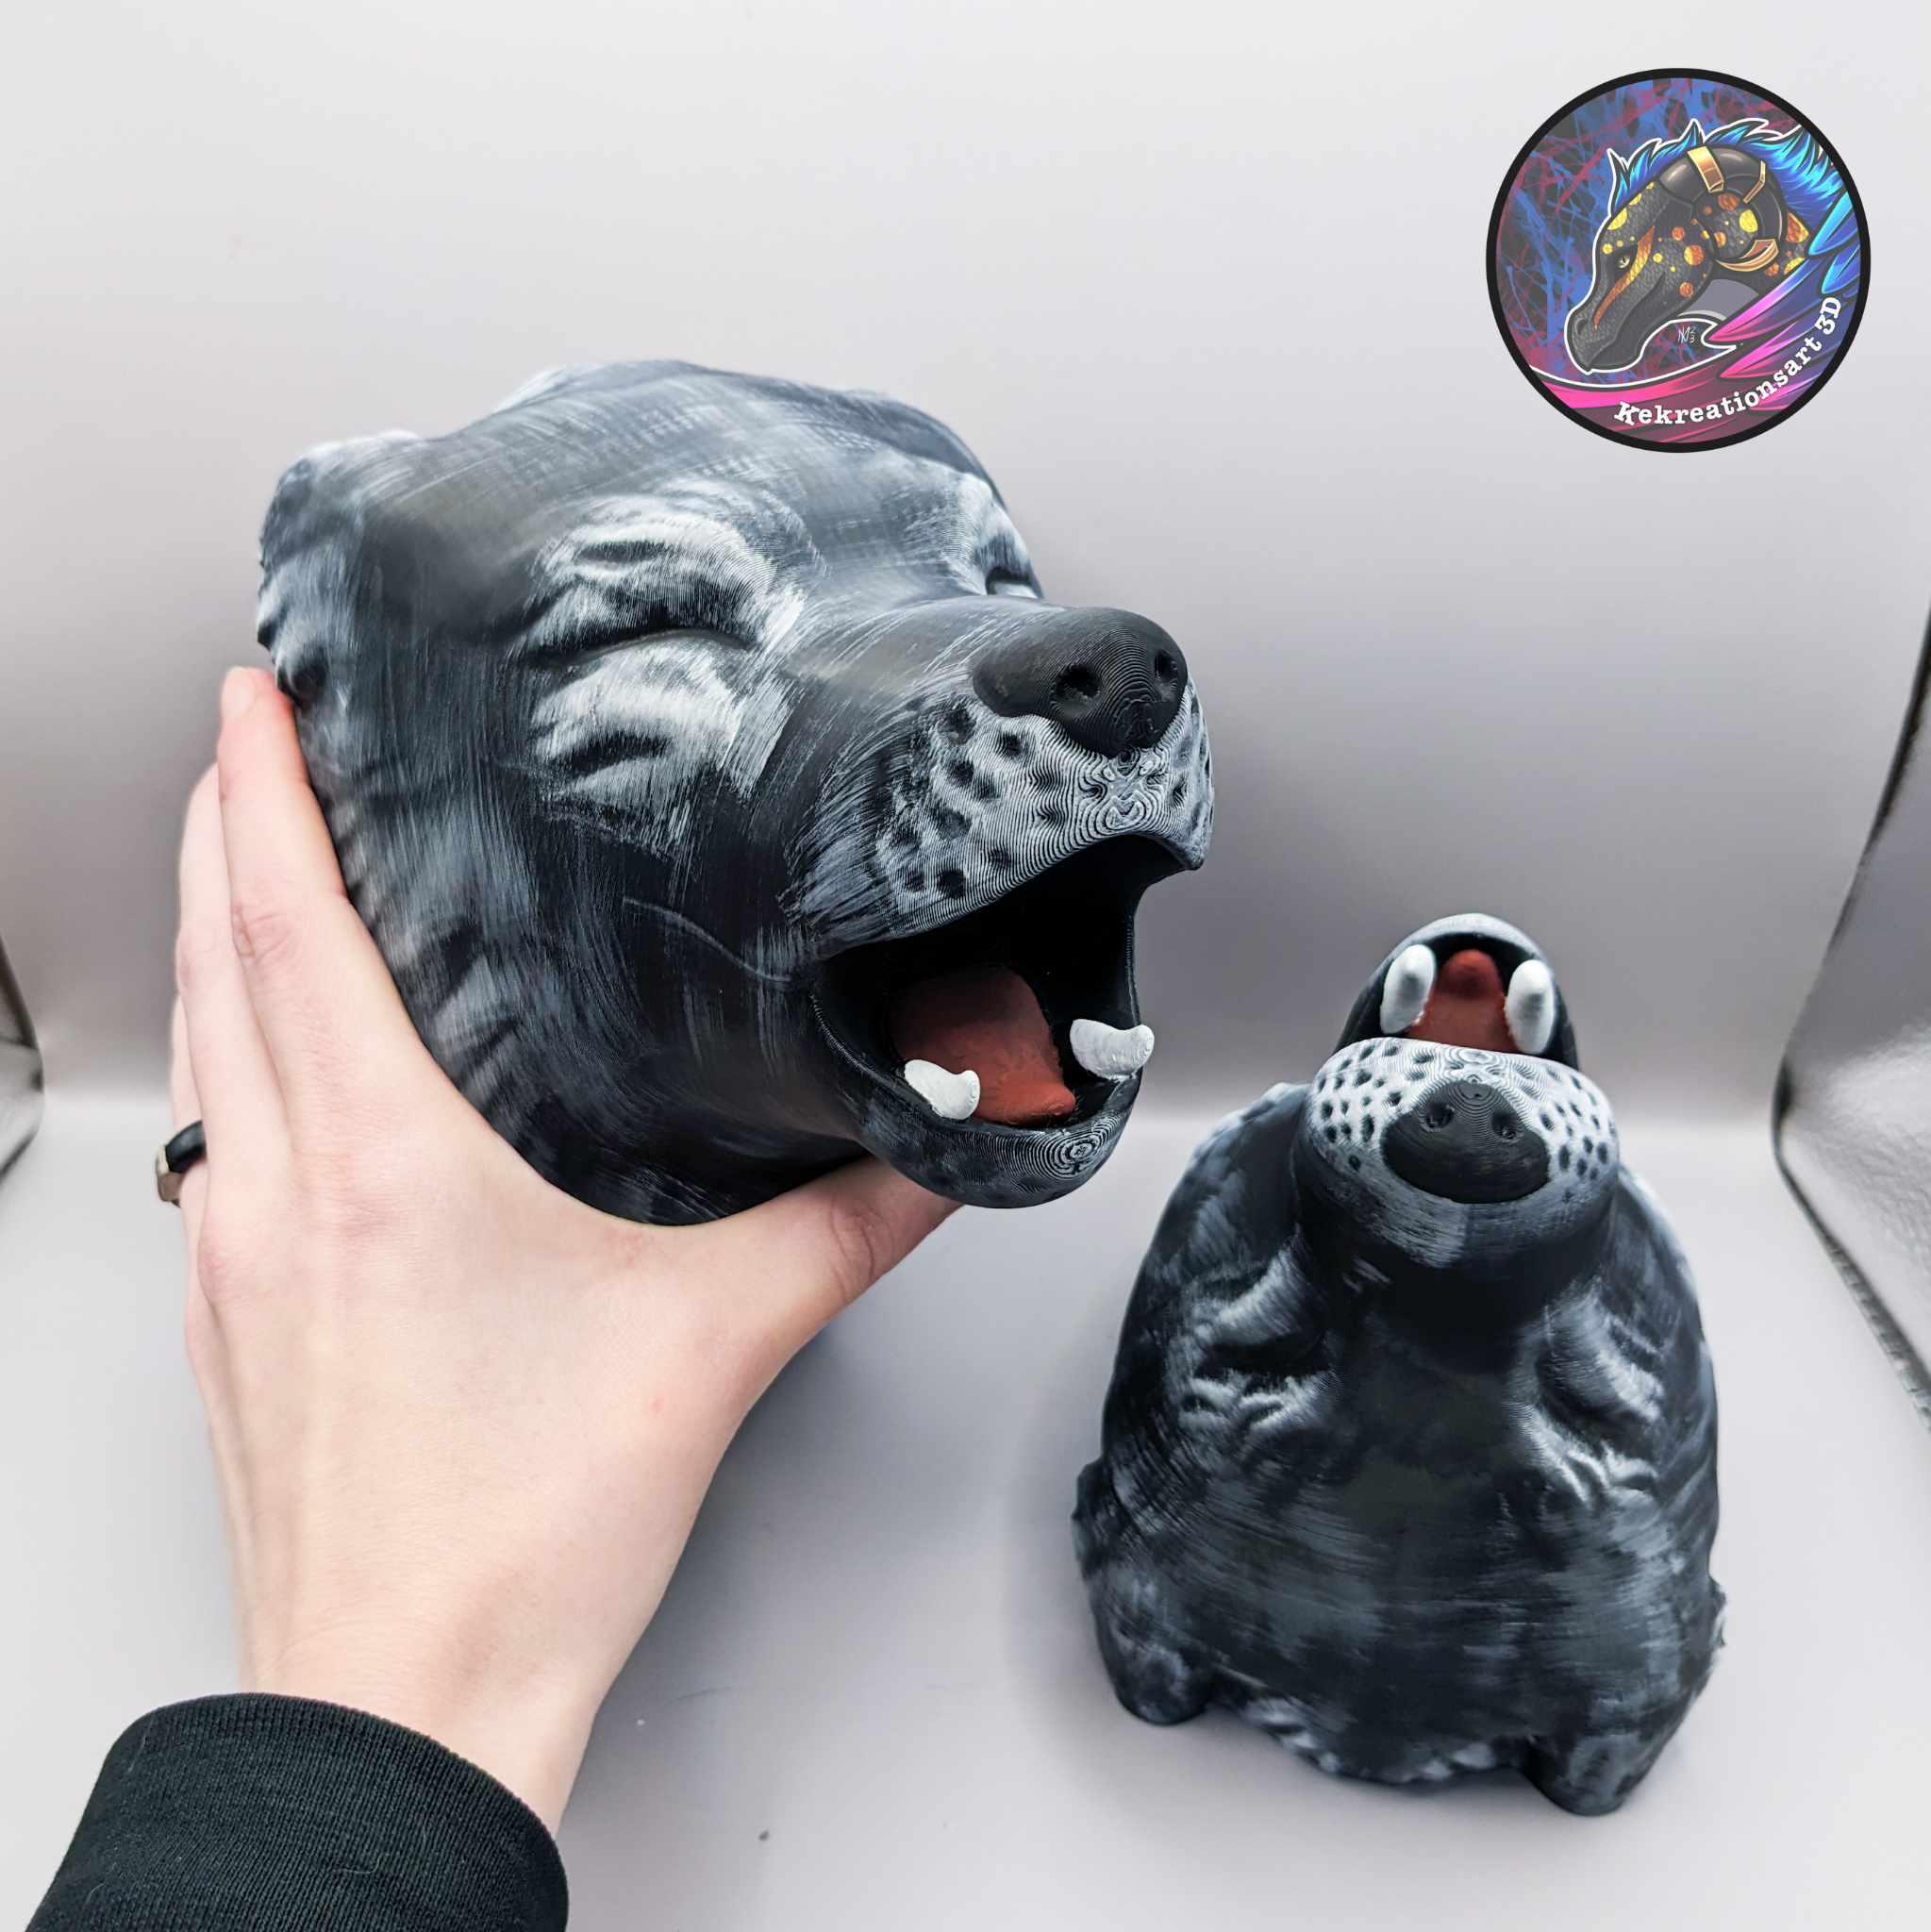 Wolf Head Decor and Wall Mount 3d model